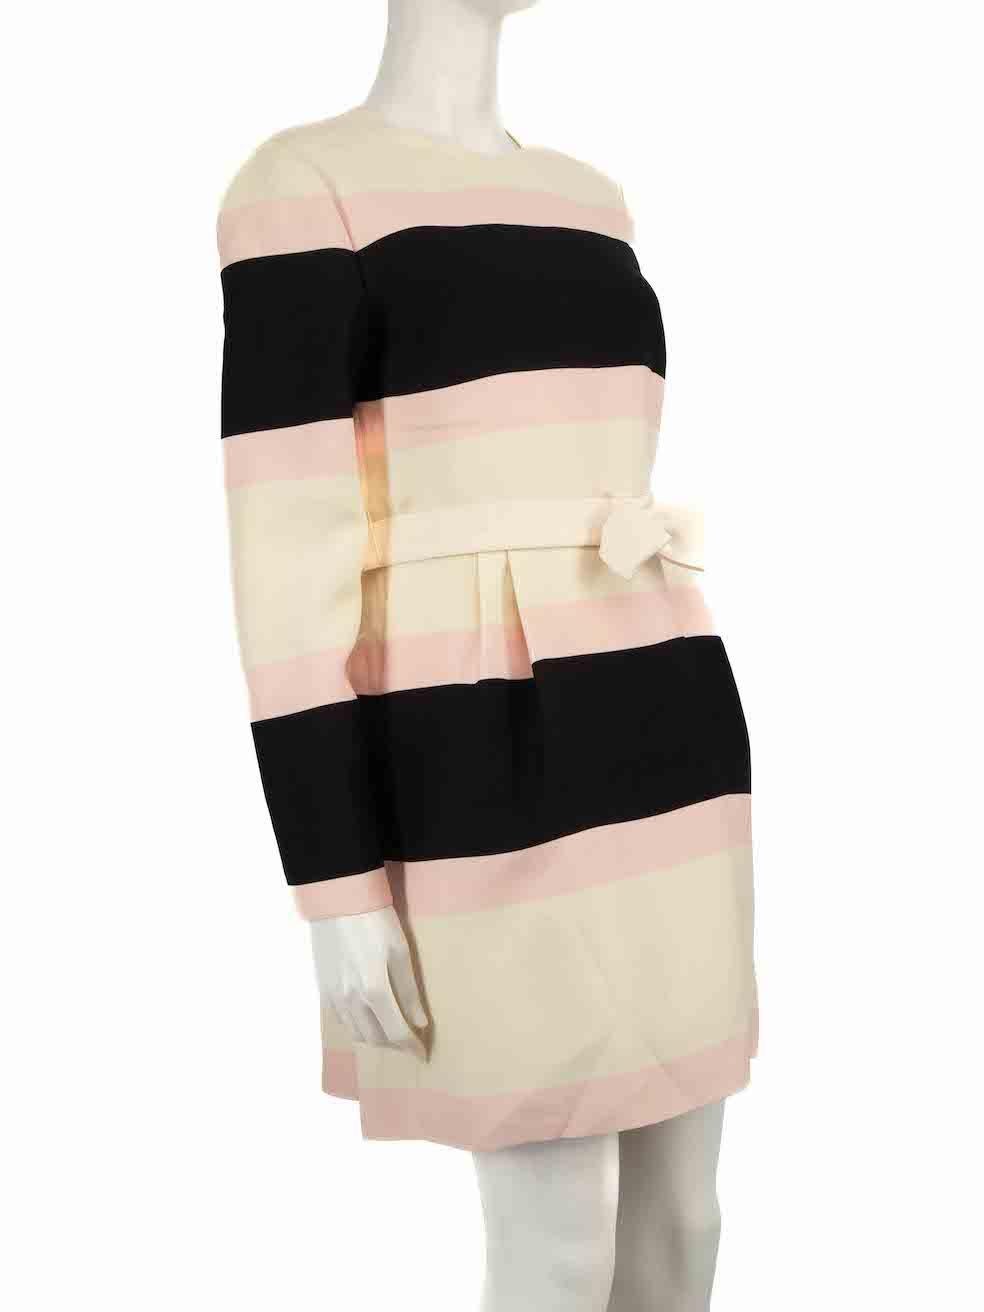 CONDITION is Very good. Minimal wear to dress is evident. Minimal wear to the left sleeve with a pluck to the weave on this used Valentino designer resale item.
 
 
 
 Details
 
 
 Multicolour- Black, cream, pink
 
 Wool
 
 Dress
 
 Striped pattern
